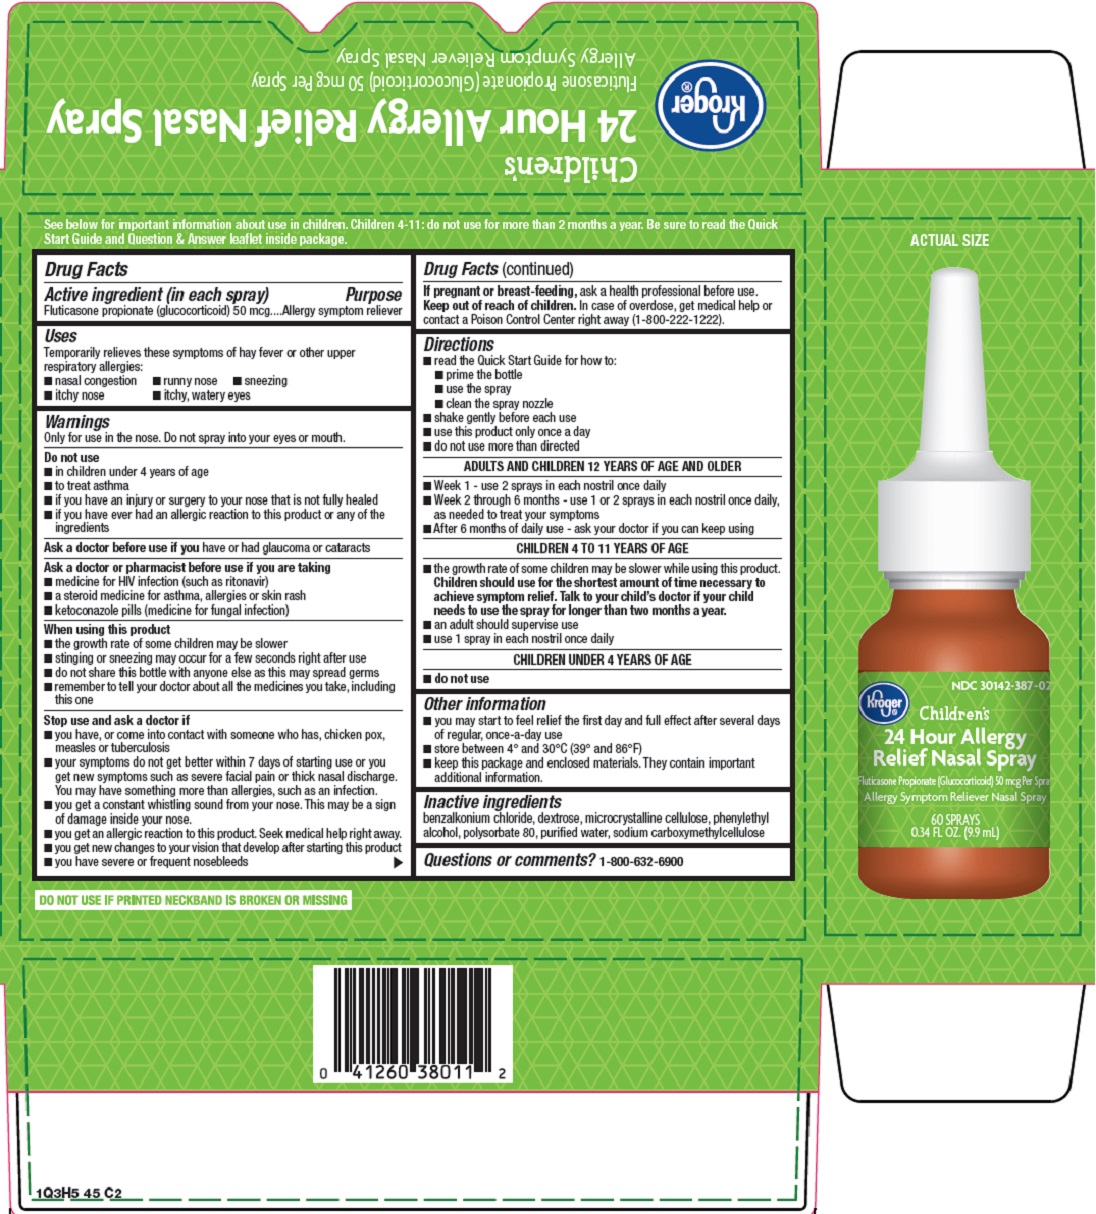 childrens 24 hour allergy relief nasal spray image 2